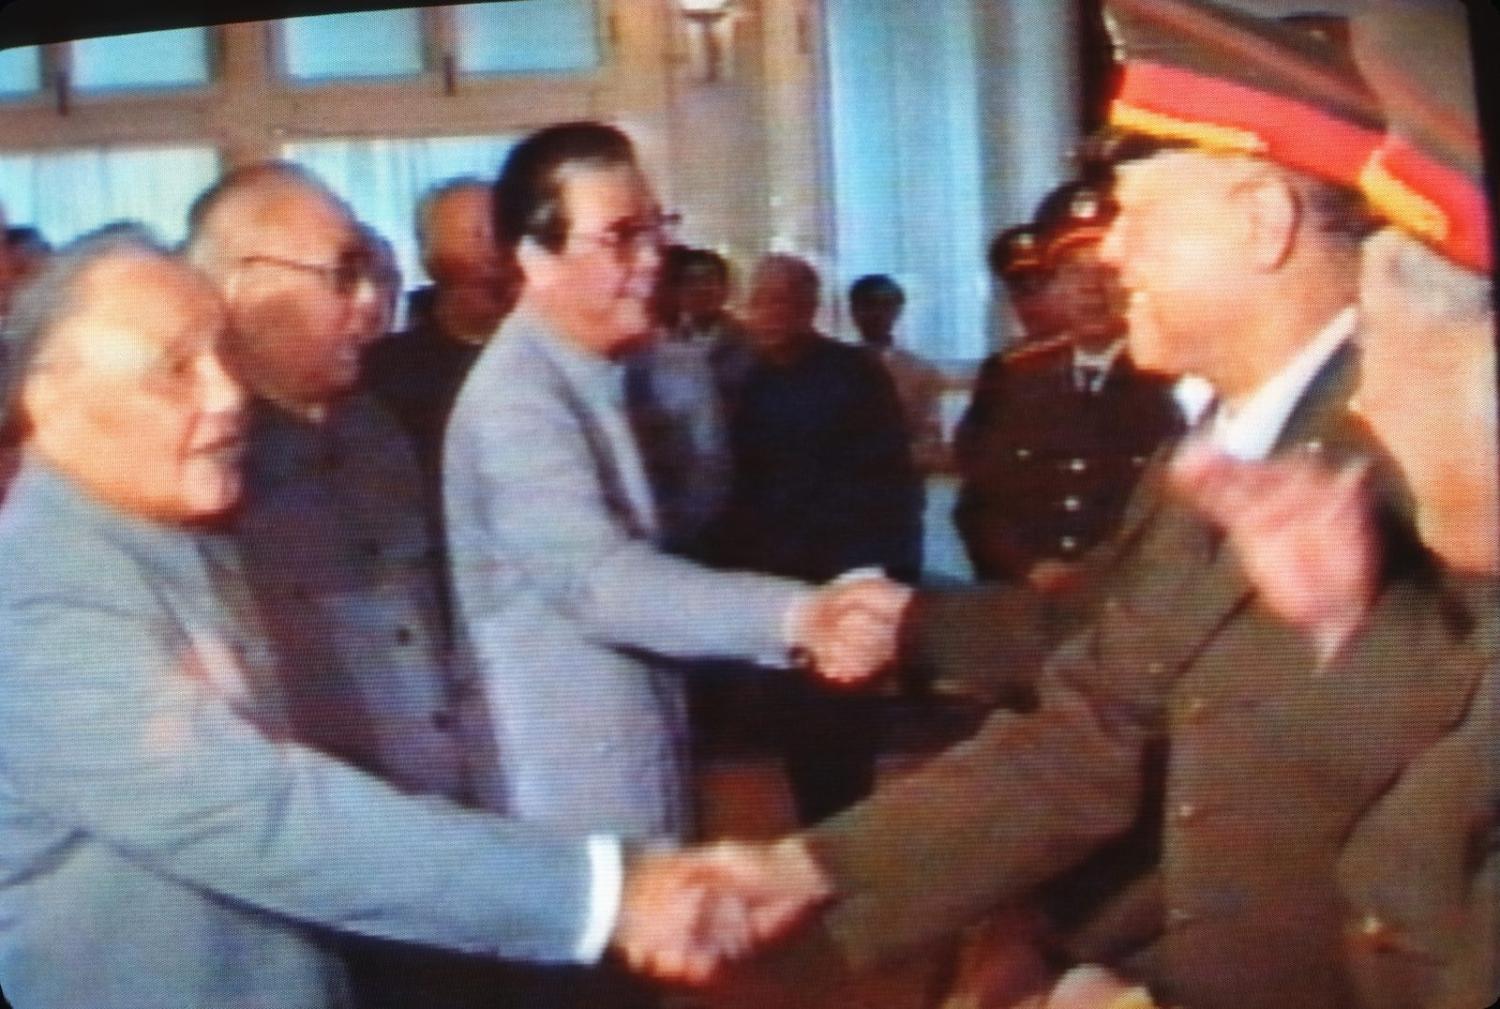 Broadcast from Chinese State Television in 1989 showing Deng Xiaoping congratulating soldiers for putting an end to the demonstrations in Tiananmen Square (Photo: Peter Charlesworth via Getty)